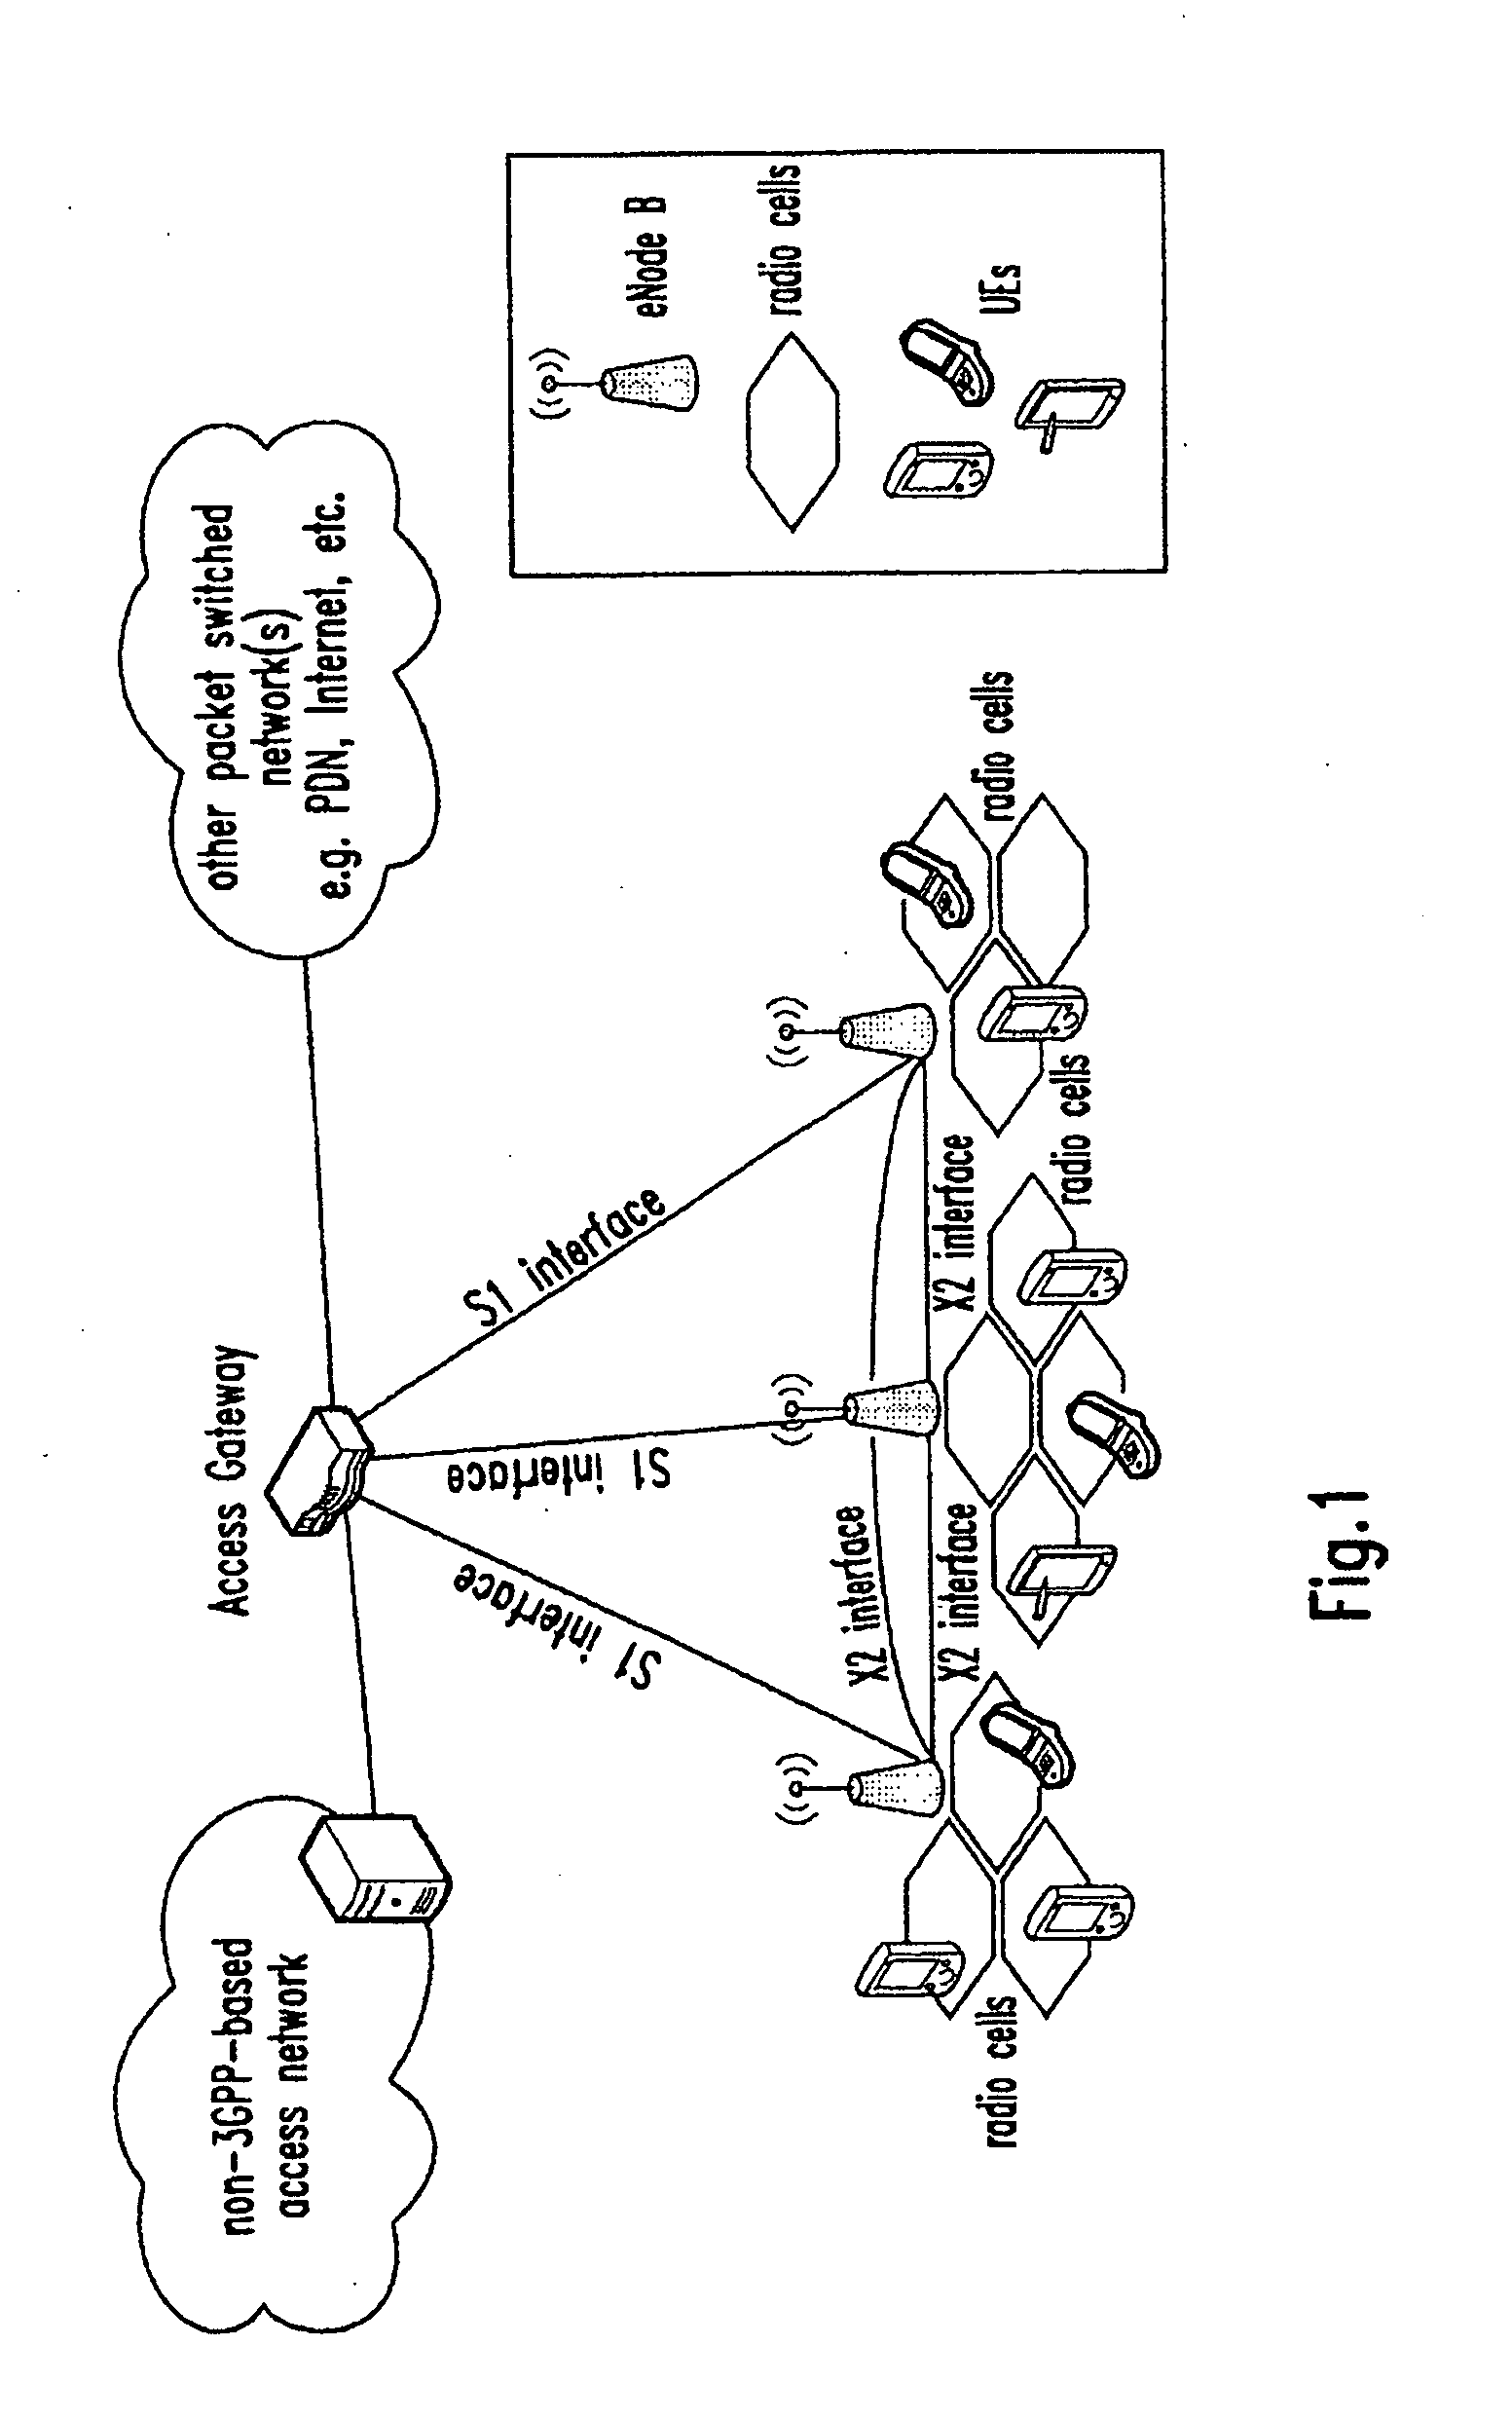 Method for supporting quality of service over a connection lifetime